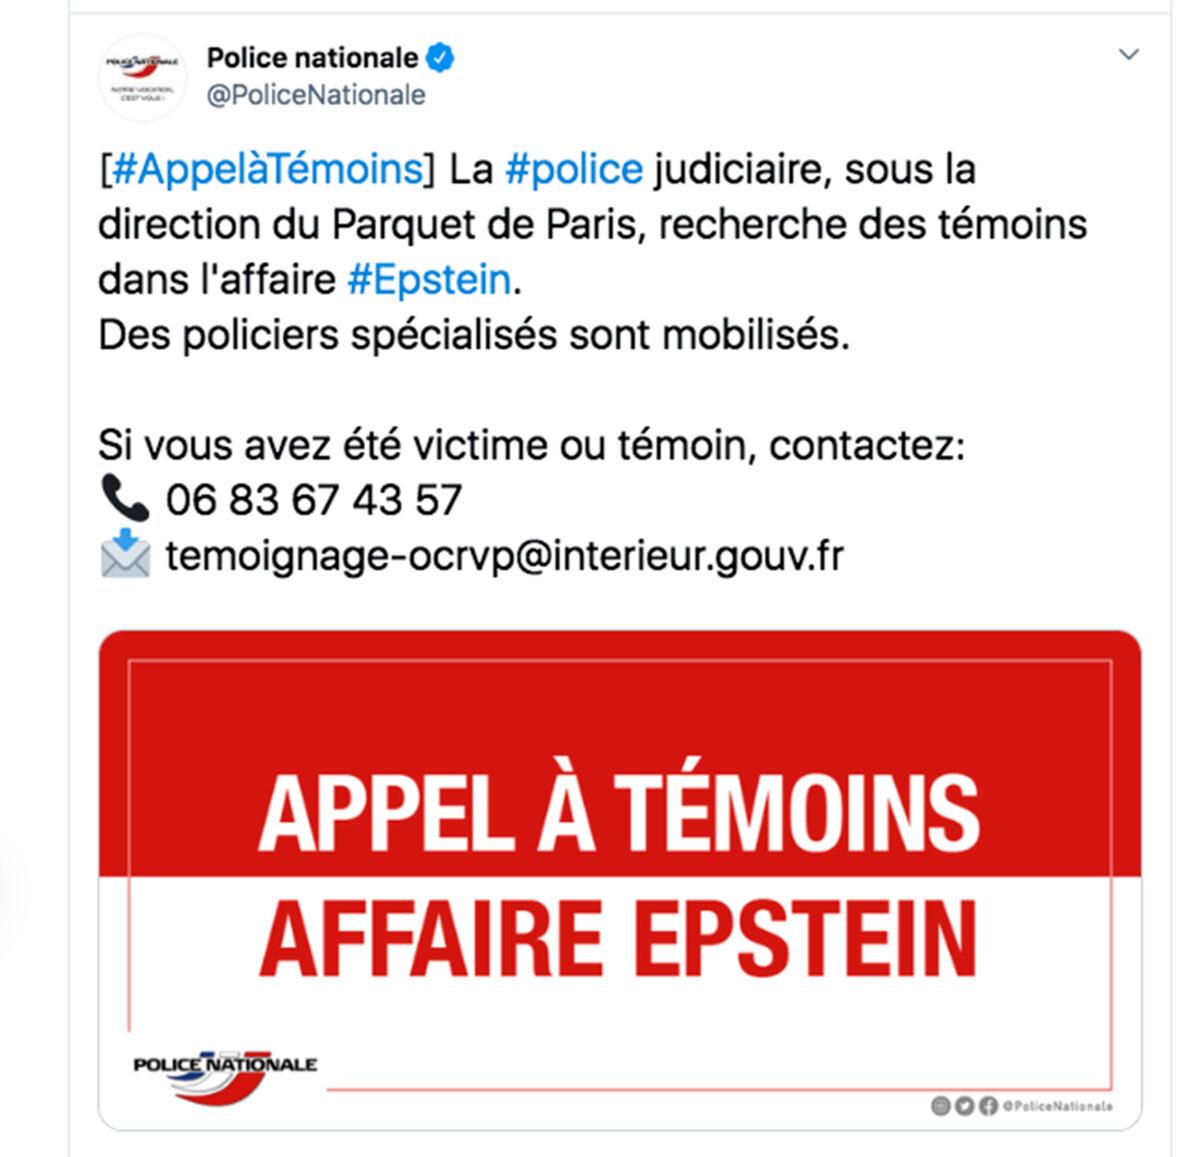 This police appeal published on Sept. 11, 2019 on the French National Police Twitter account shows a call for witnesses in the Epstein case. (Police Nationale via AP)